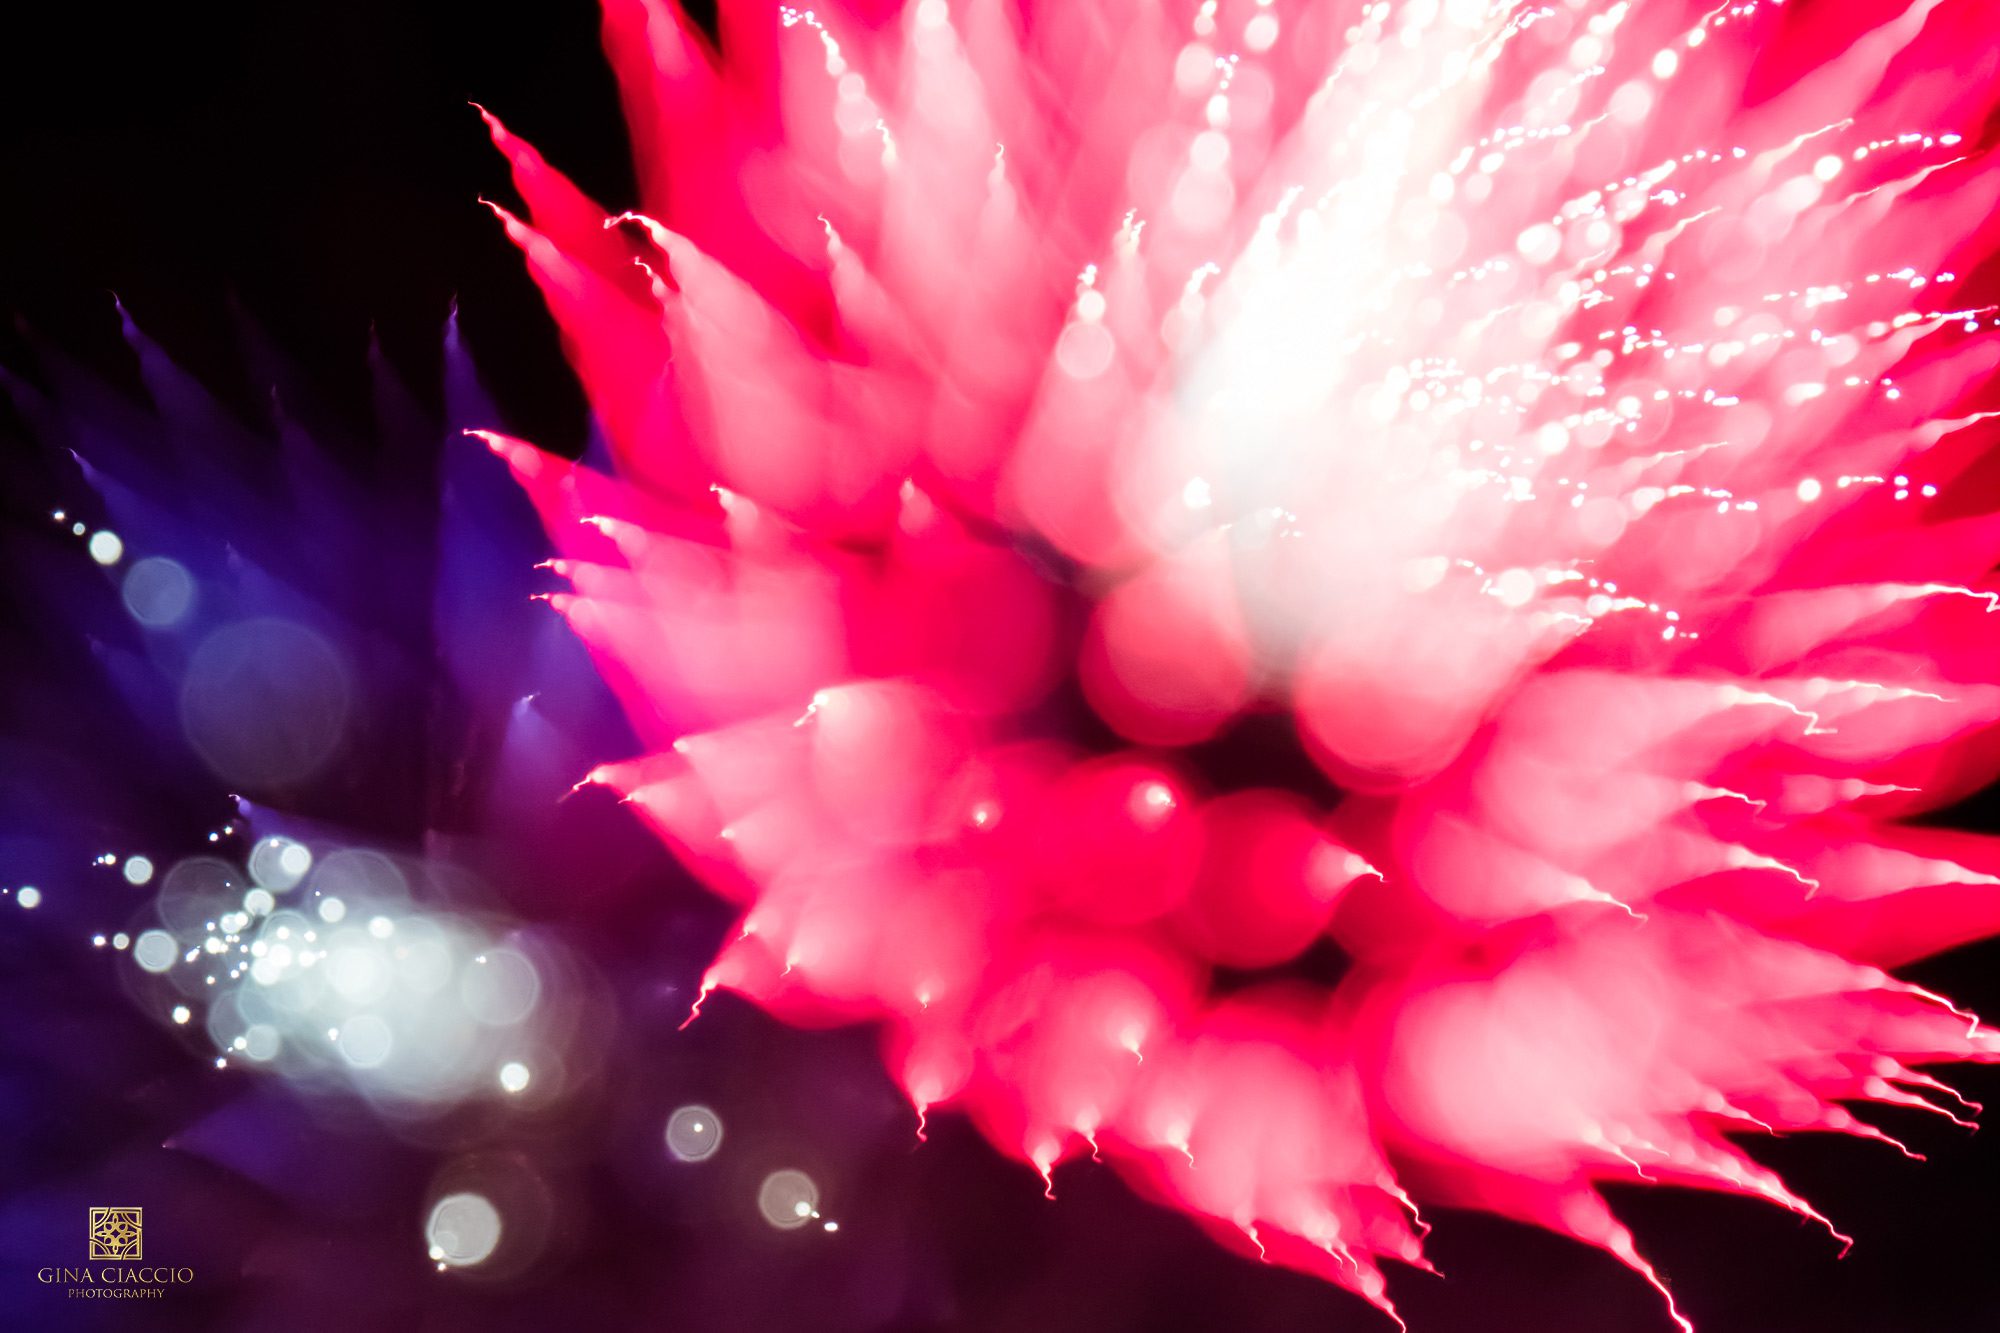 Blue and red fireworks that look like flowers by Gina Ciaccio Photography